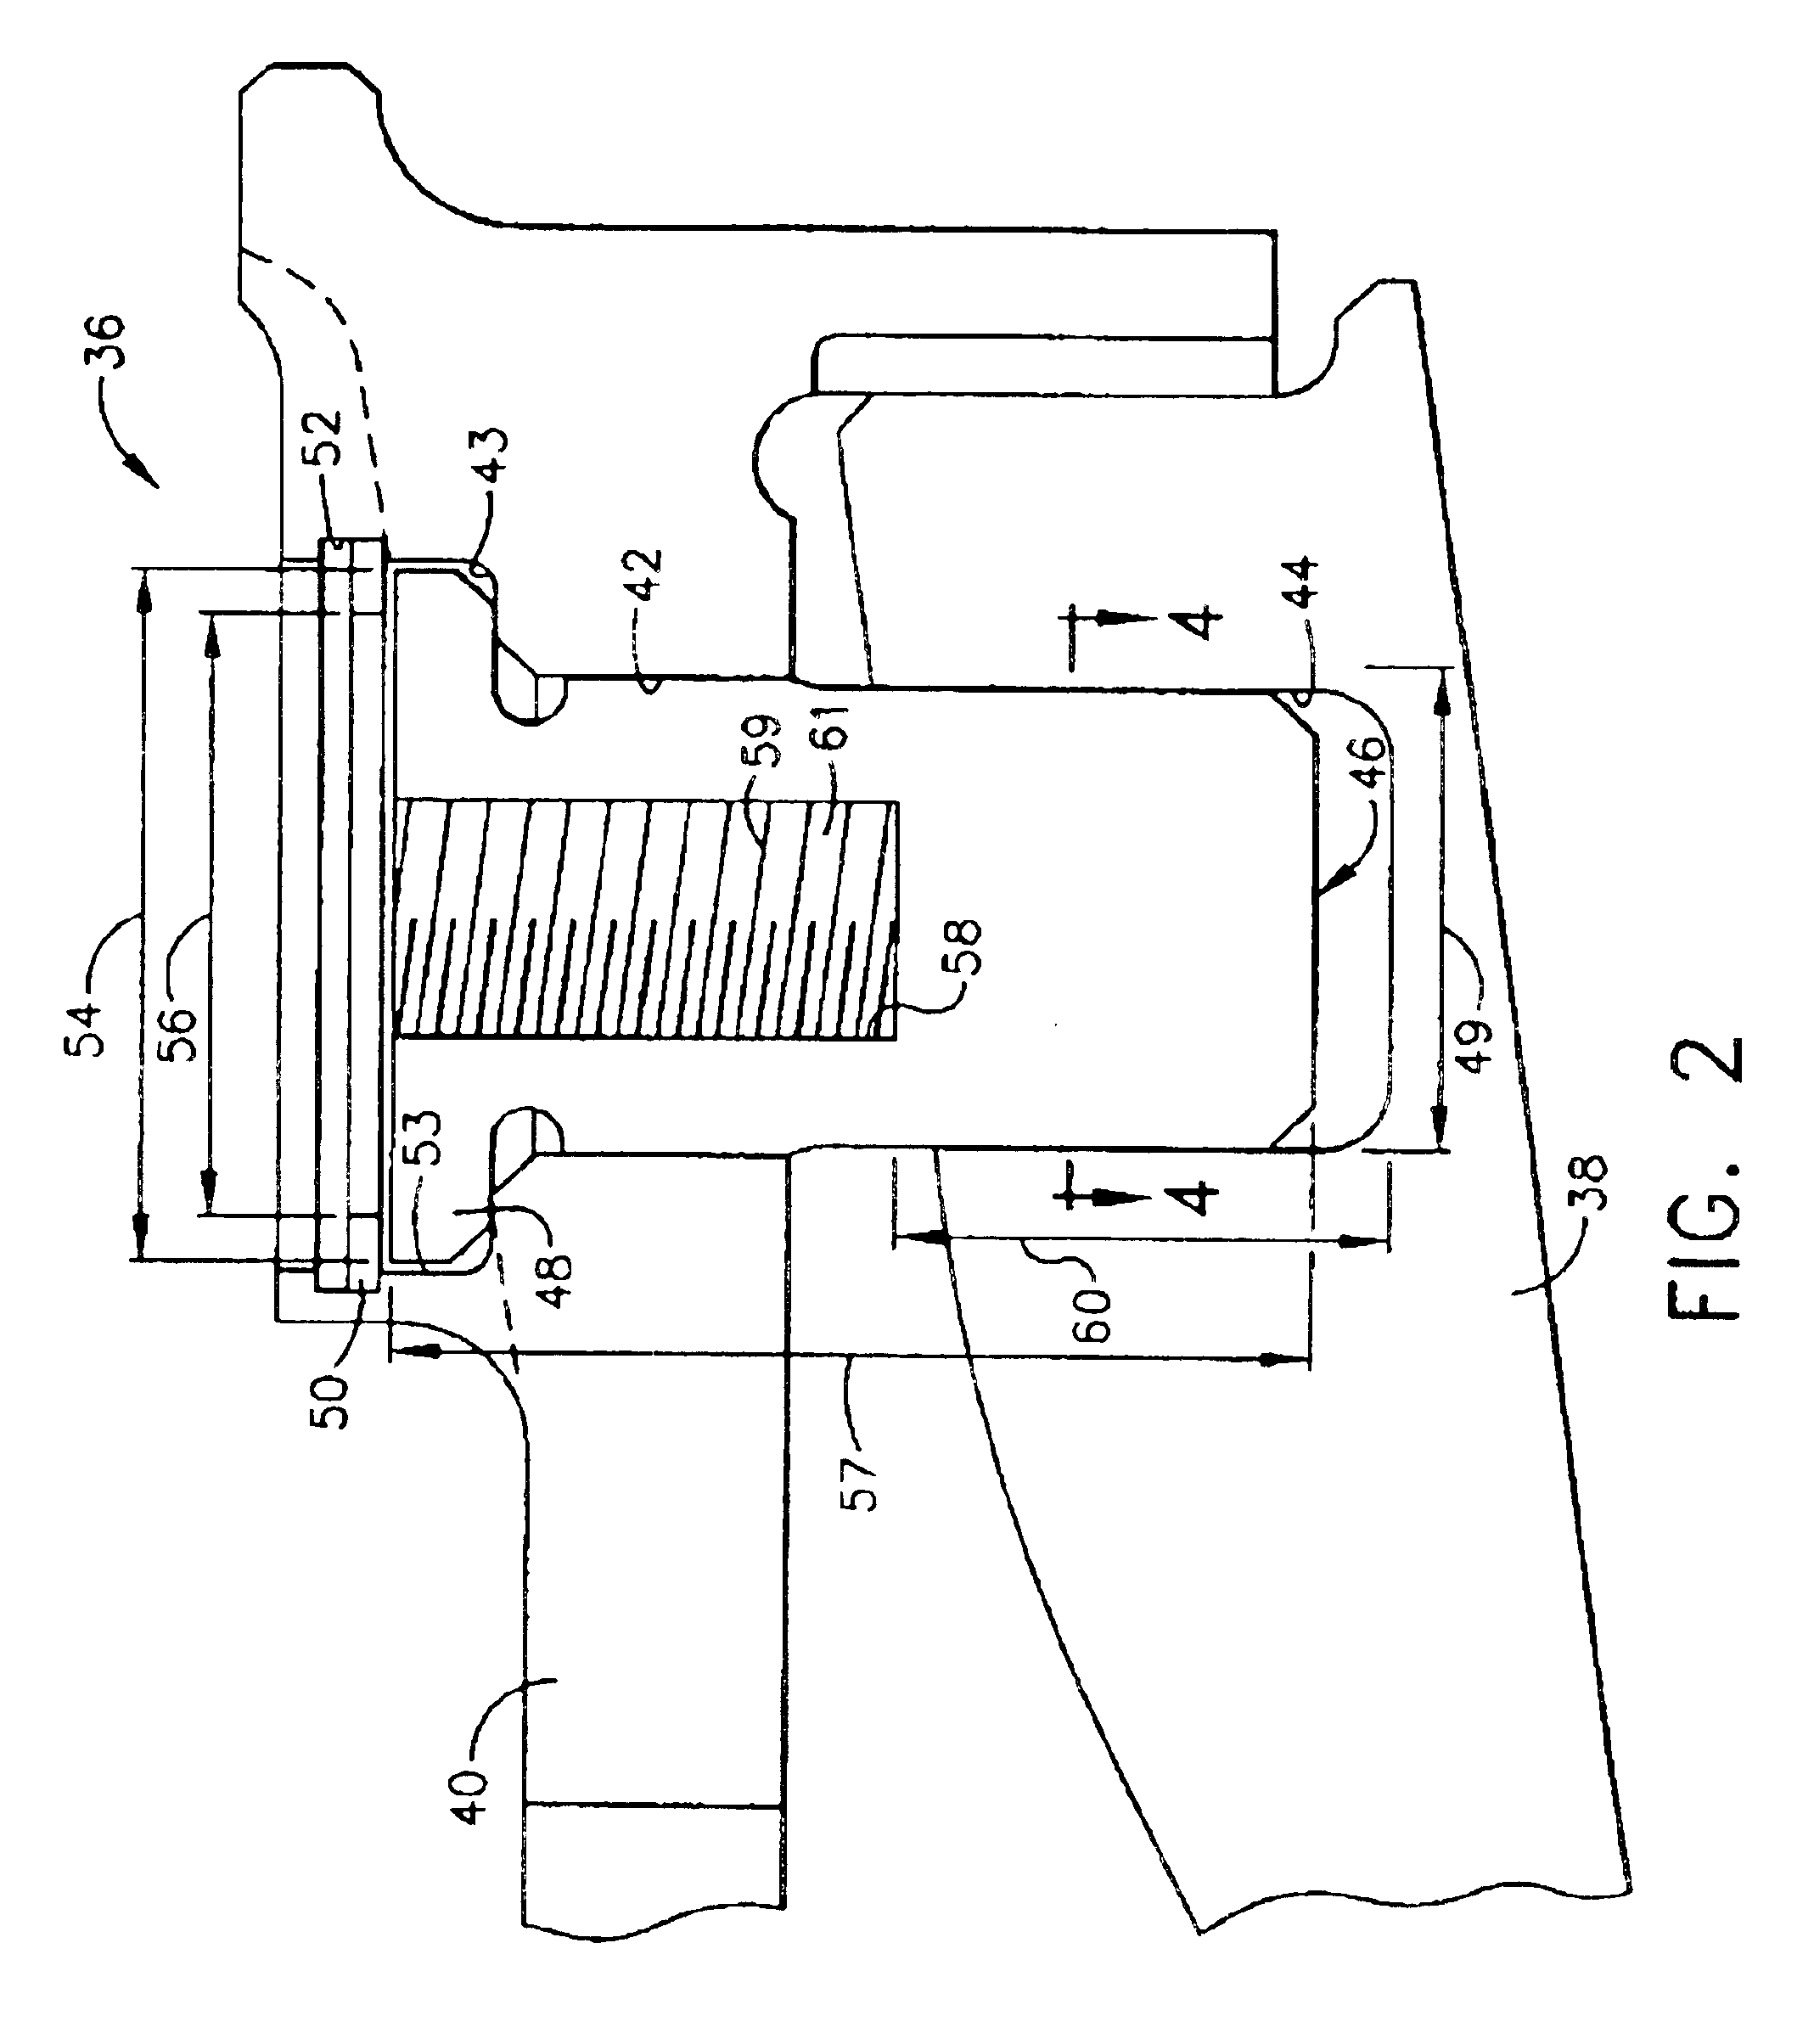 Mounting assembly for the aft end of a ceramic matrix composite liner in a gas turbine engine combustor